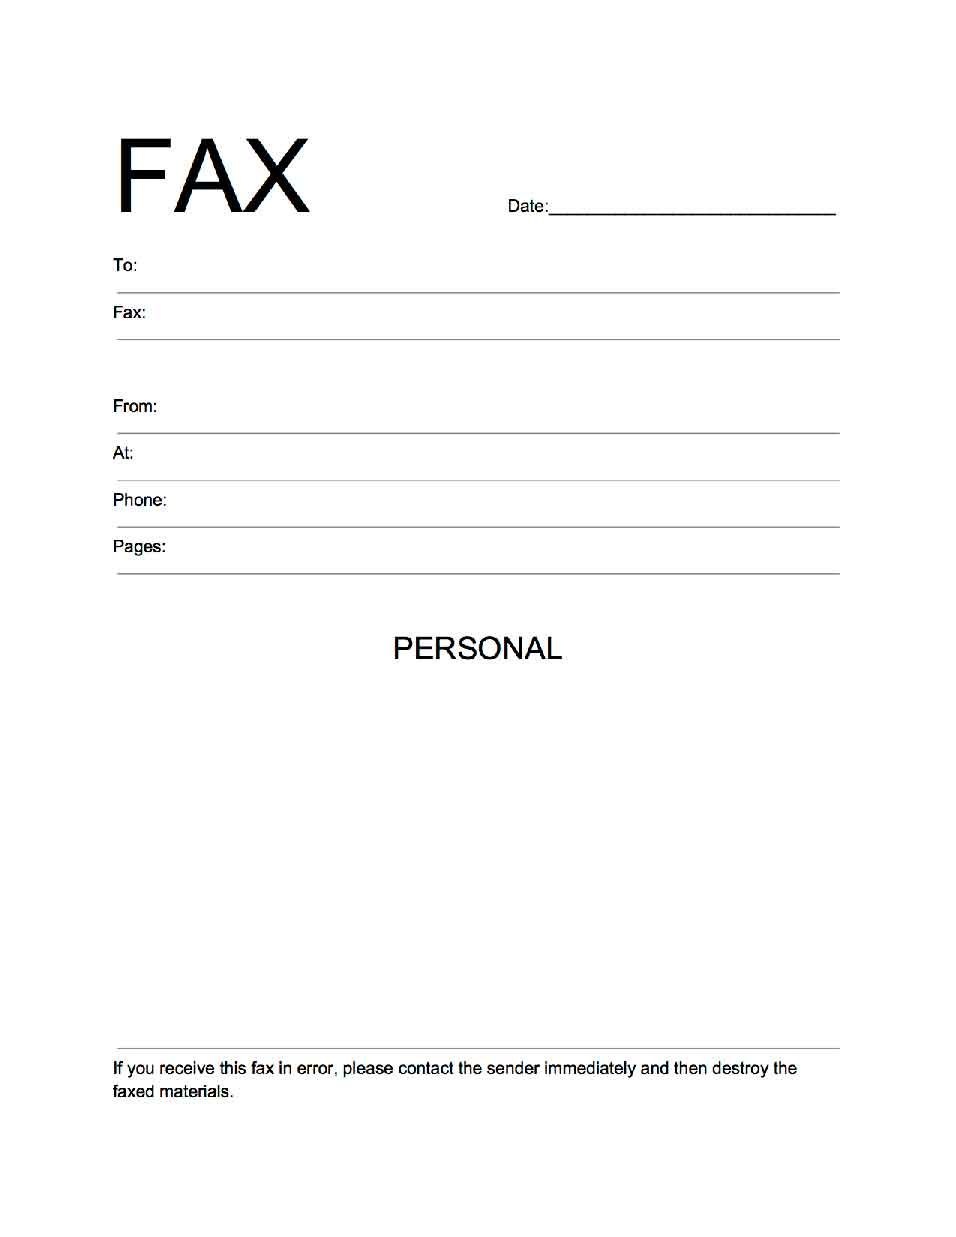 Sample Fax Cover Sheet For All Business Faxing Needs. Description - Free Printable Fax Cover Sheet